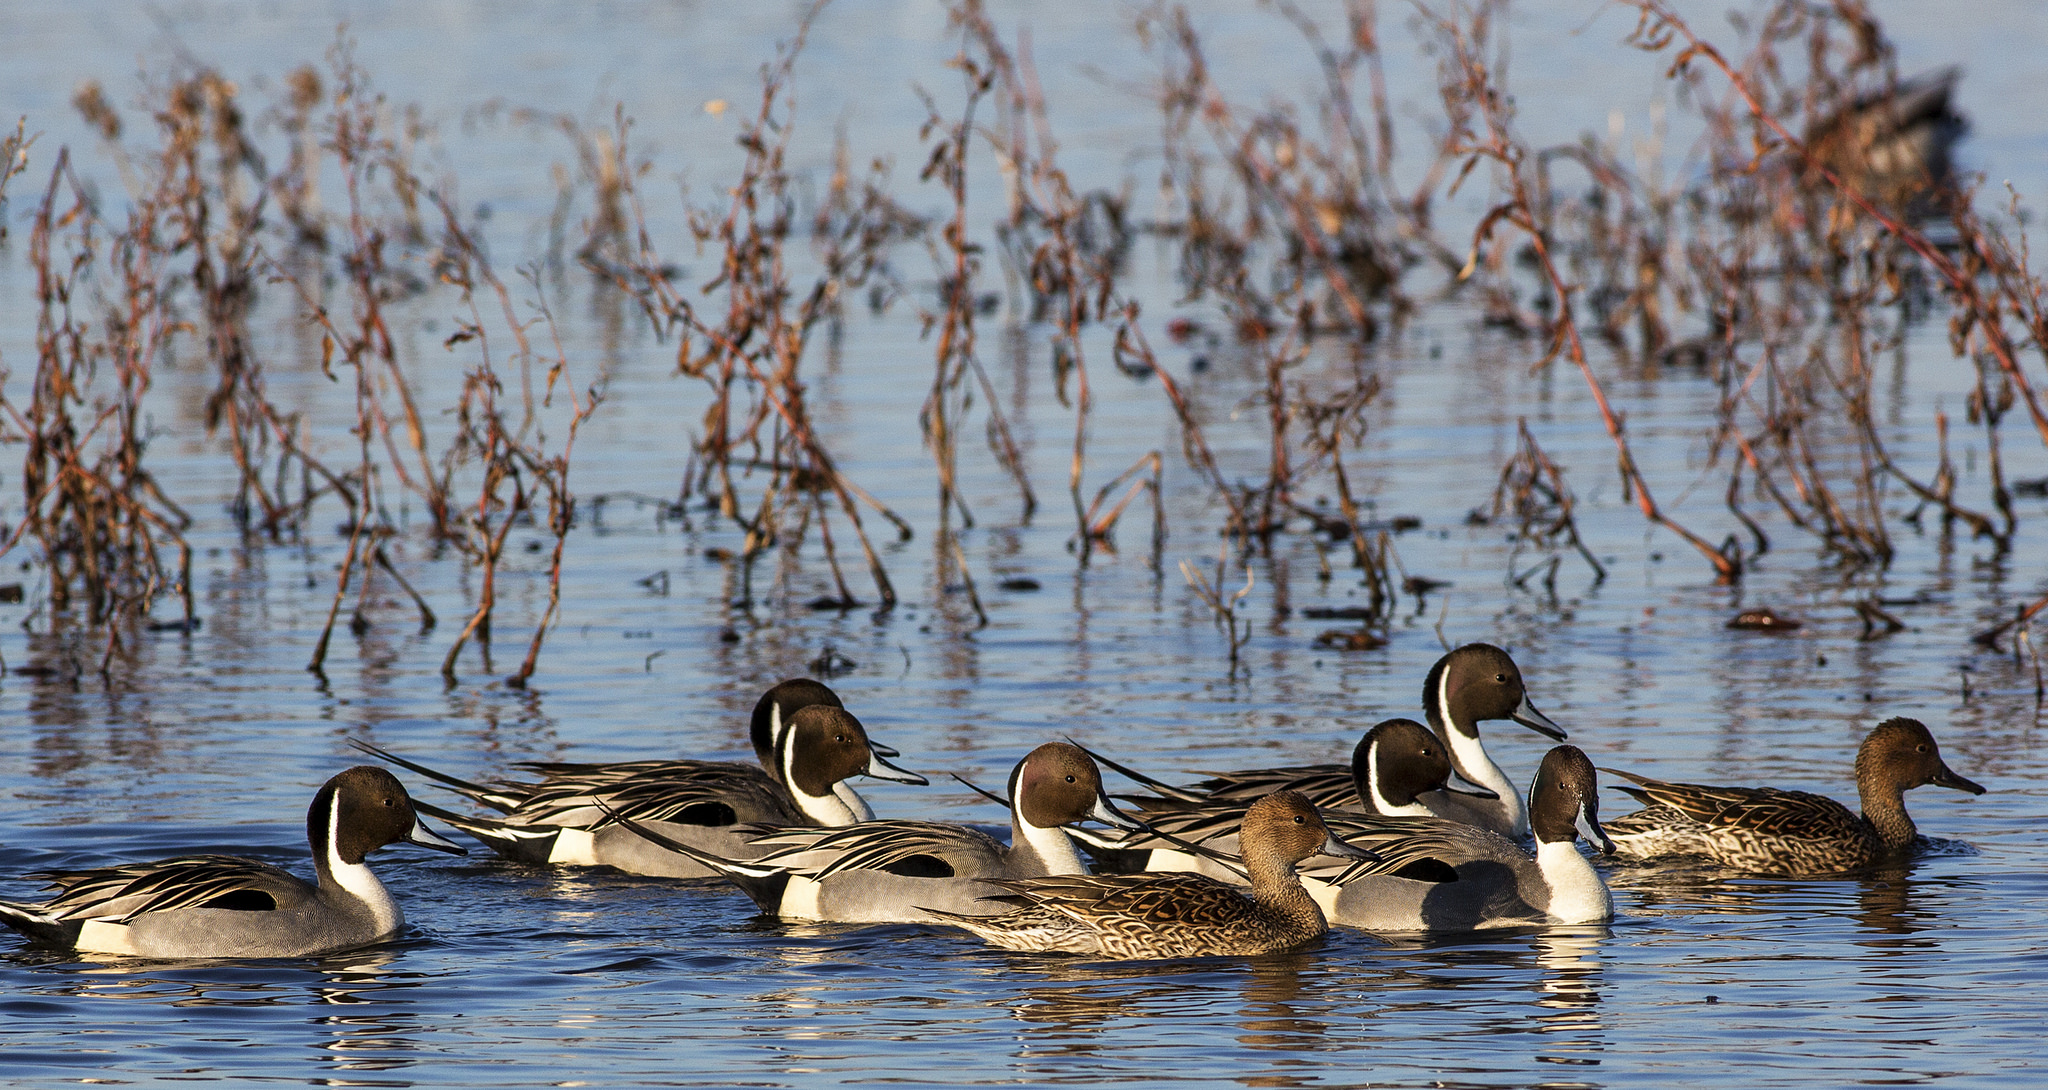 Northern Pintail in California's Central Valley <br>Bob Wick, Bureau of Land Management